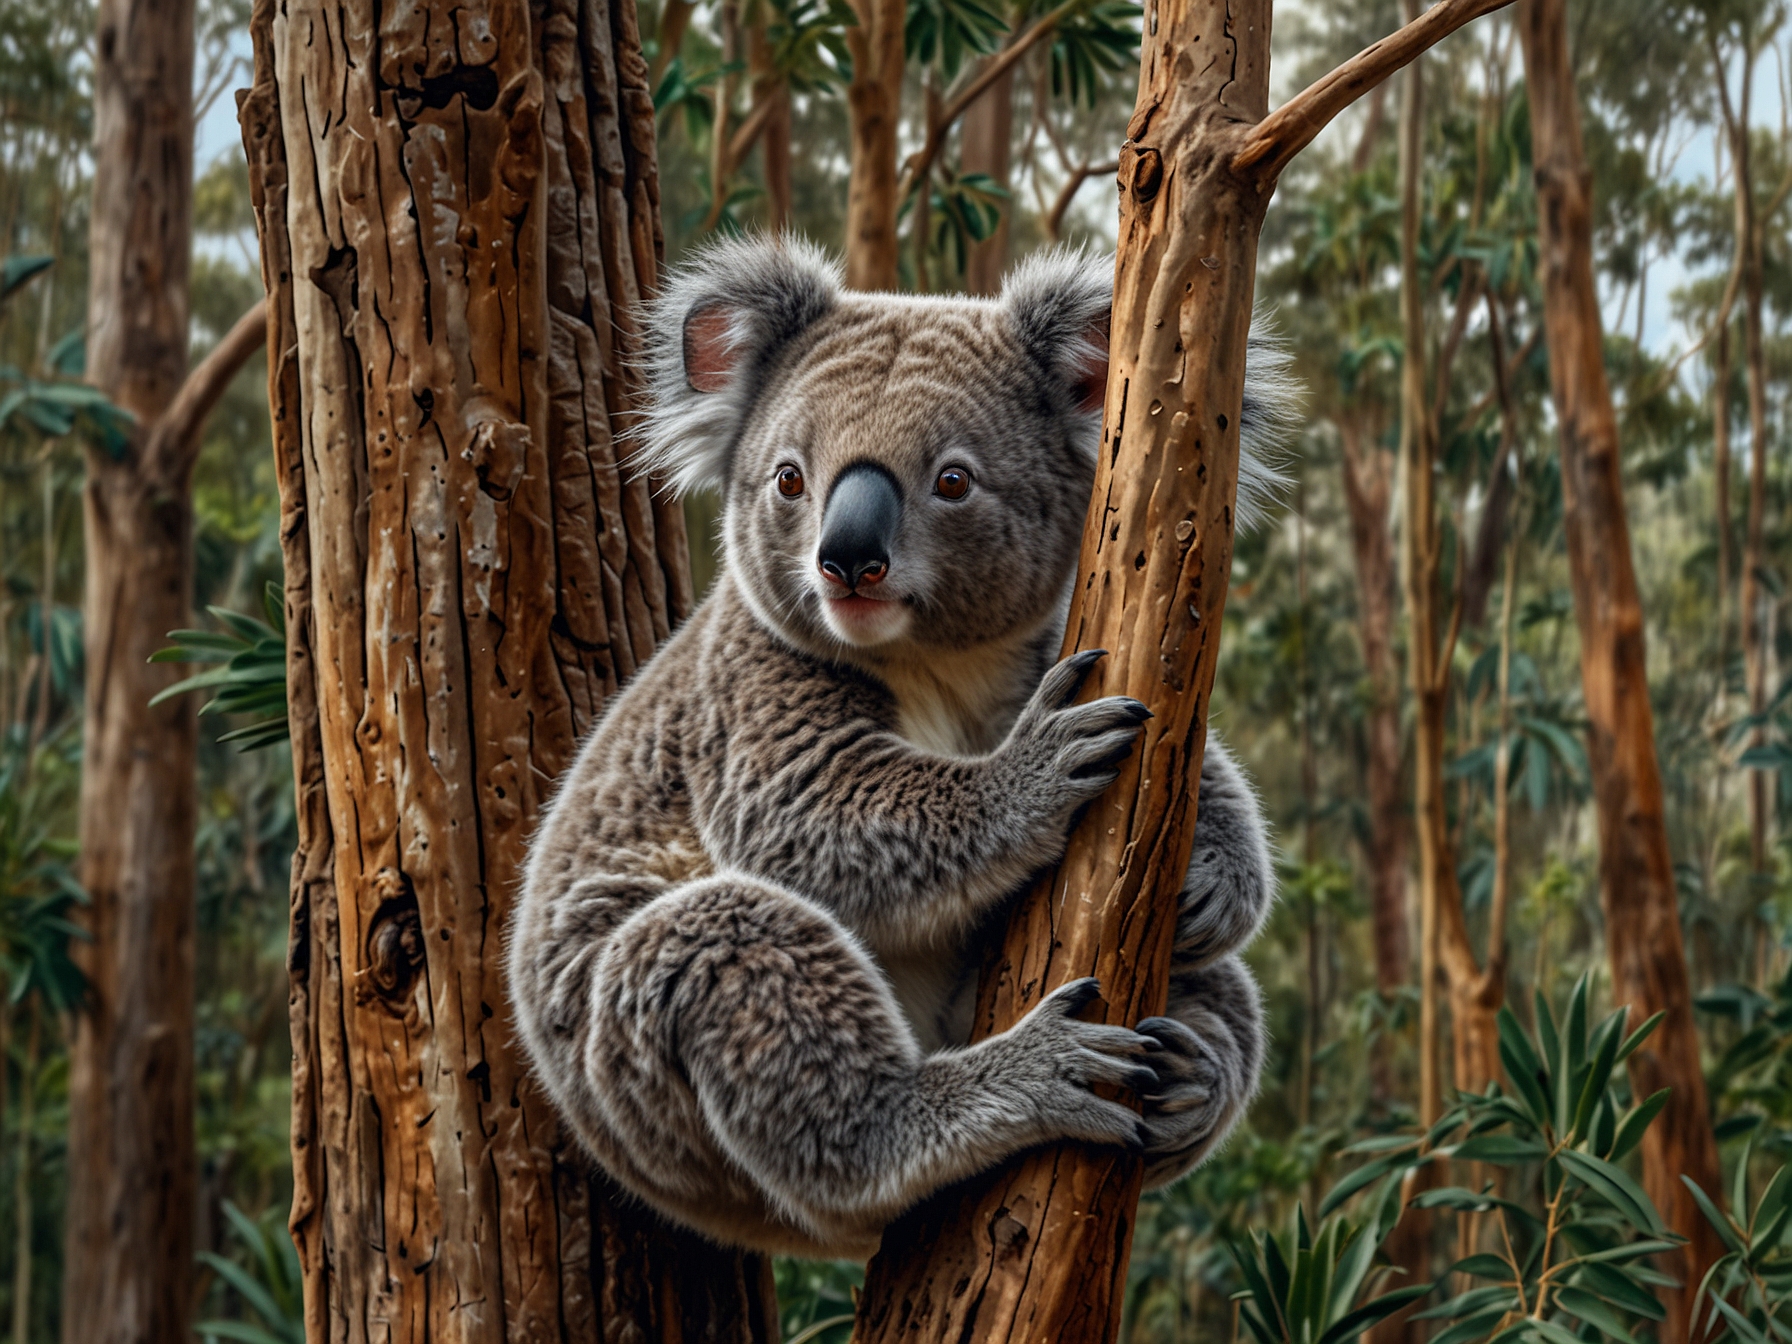 A koala clinging to a tall eucalypt tree in an Australian native forest, symbolizing the unique wildlife that depends on these habitats and illustrating the impact of logging on endangered species.